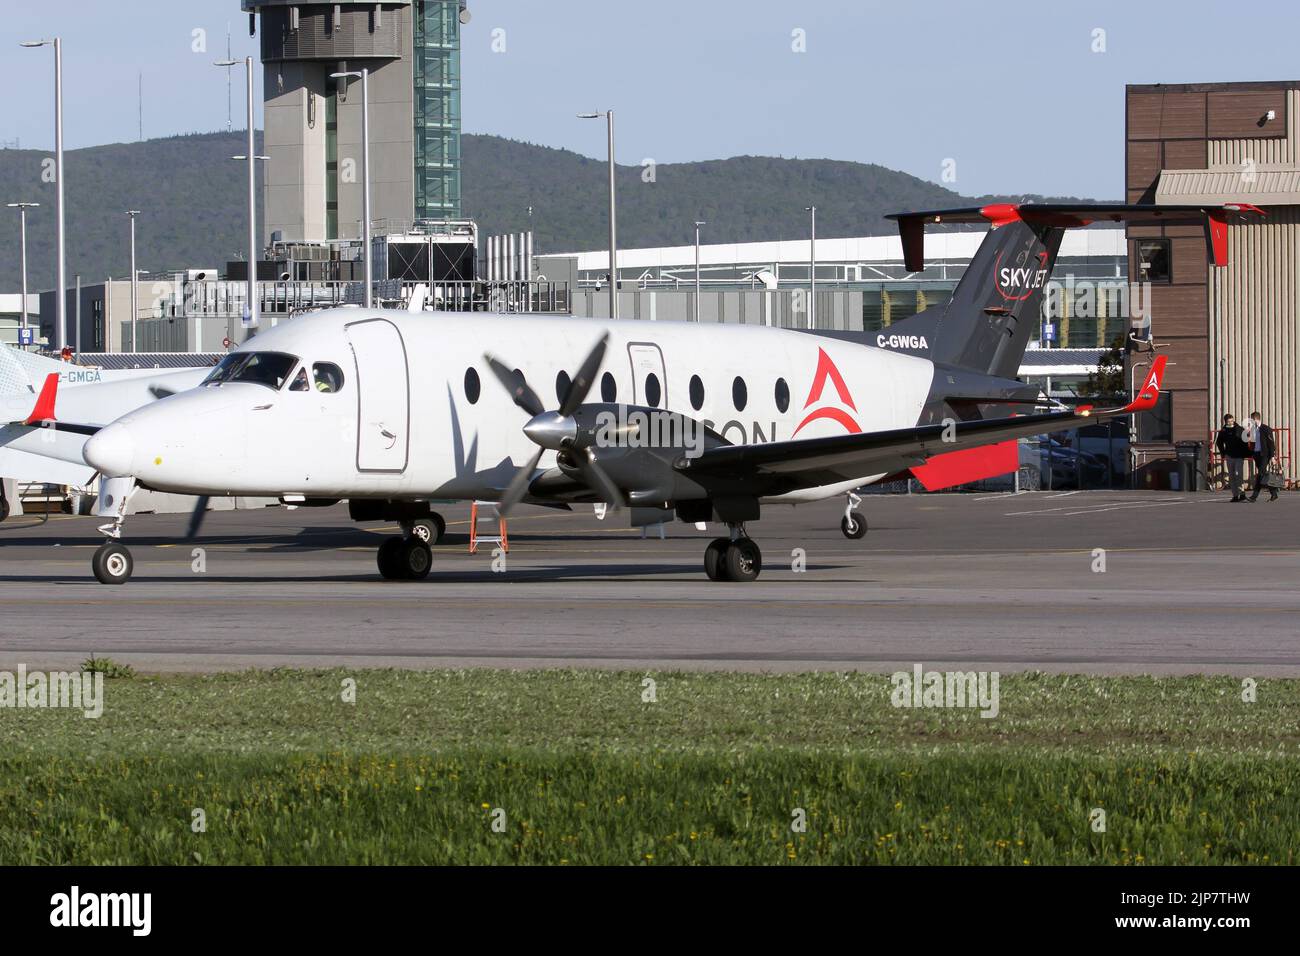 A Skyjet Aviation (Air Liaison) Beechcraft 1900D taxiing at Quebec airport. Air Liaison is a regional airline based in Quebec City, Quebec with its base at Québec City Jean Lesage International Airport. It operates scheduled flights to 16 domestic destinations from Monday to Friday.The Beechcraft 1900 is a 19-passenger, pressurized twin-engine turboprop fixed-wing aircraft that was manufactured by Beechcraft. It was designed and is primarily used, as a regional airliner. It is also used as a freight aircraft and corporate transport. (Photo by Fabrizio Gandolfo/SOPA Images/Sipa USA) Stock Photo